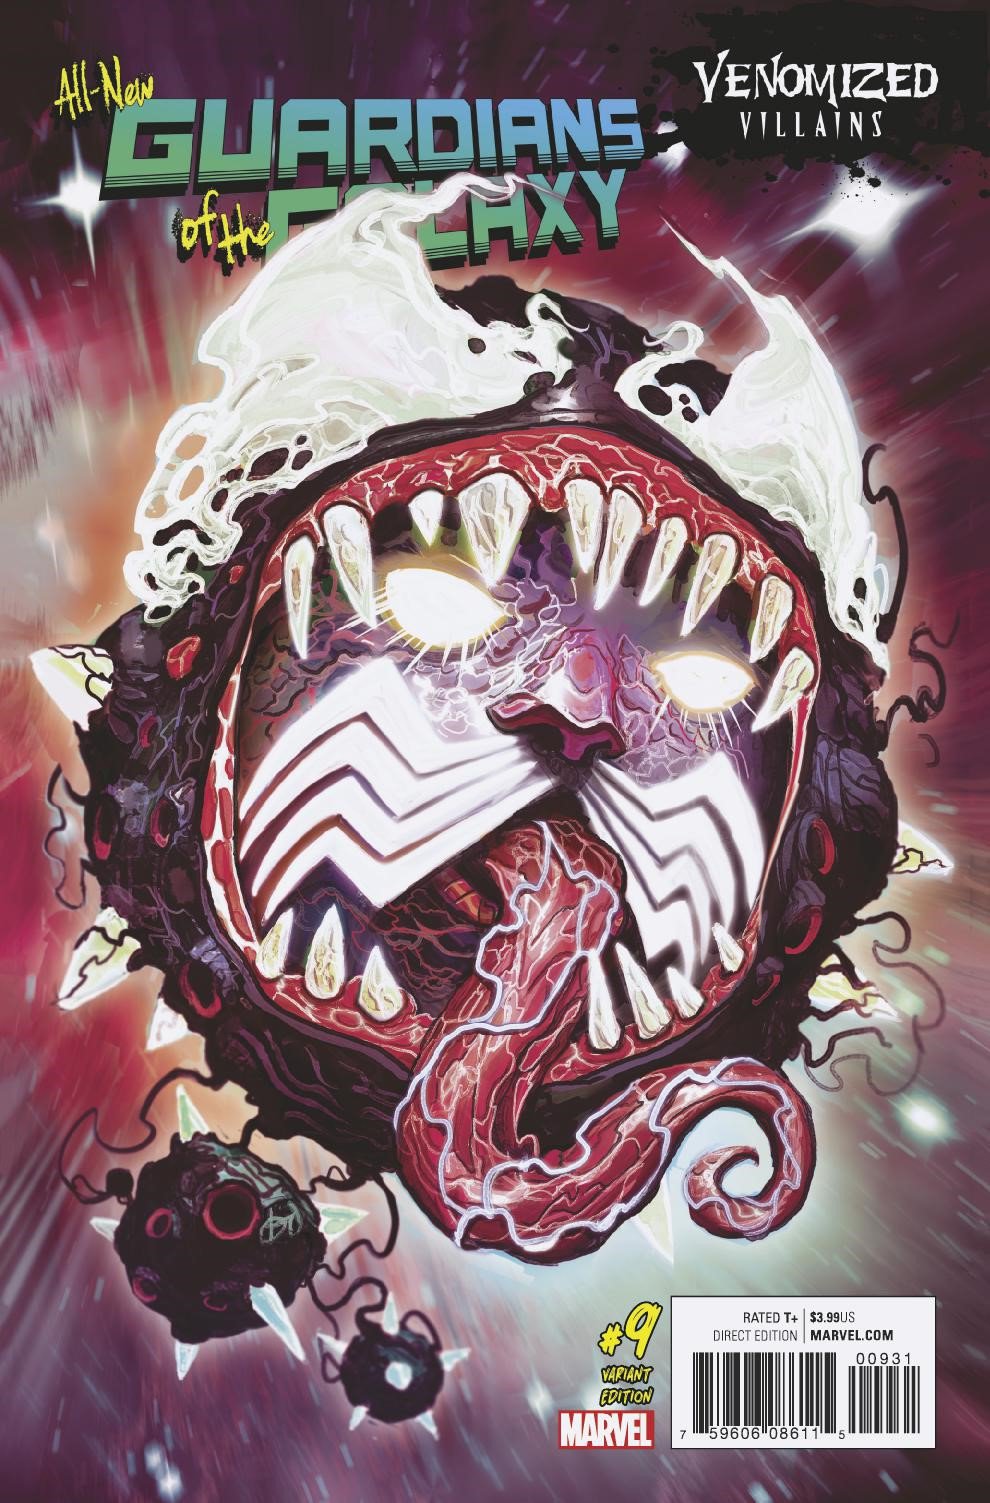 ALL NEW GUARDIANS OF GALAXY #9 VENOMIZED EGO VAR COVER